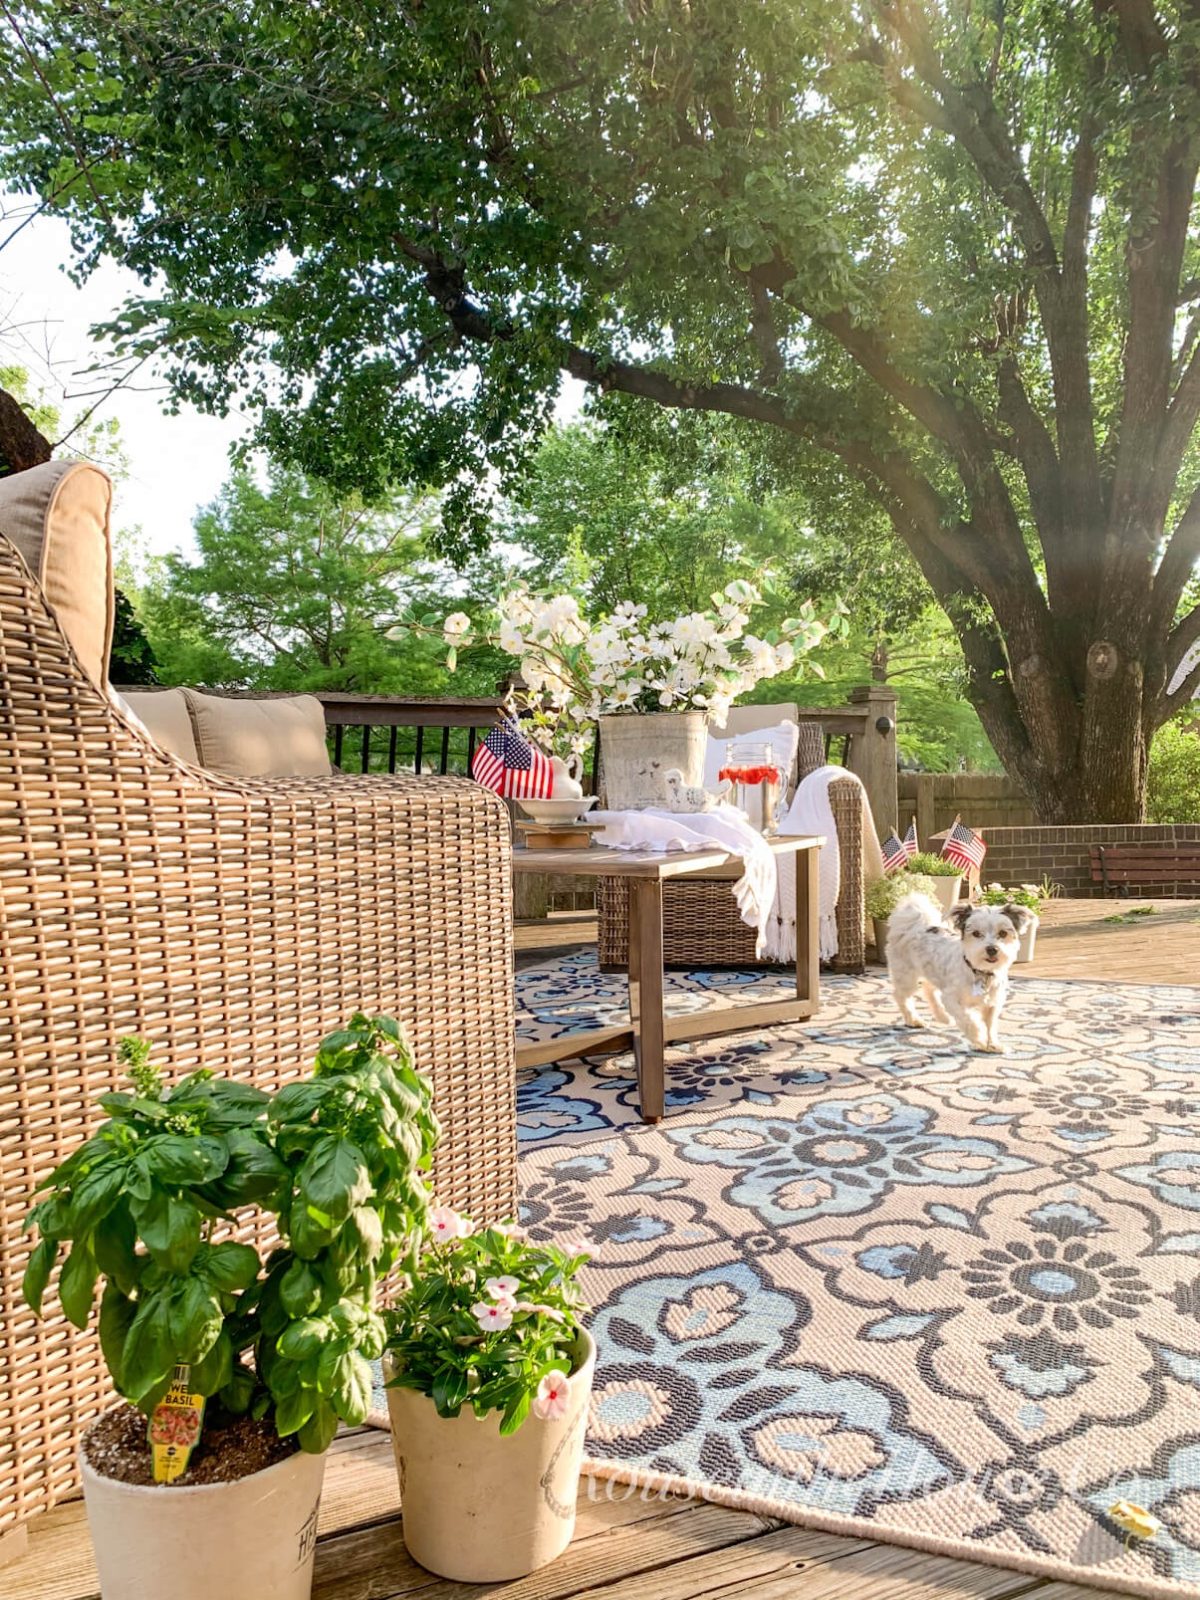 A blue and beige medallion outdoor area rug under a wicker patio furniture set. Potted herbs and flowers surround the sitting area.